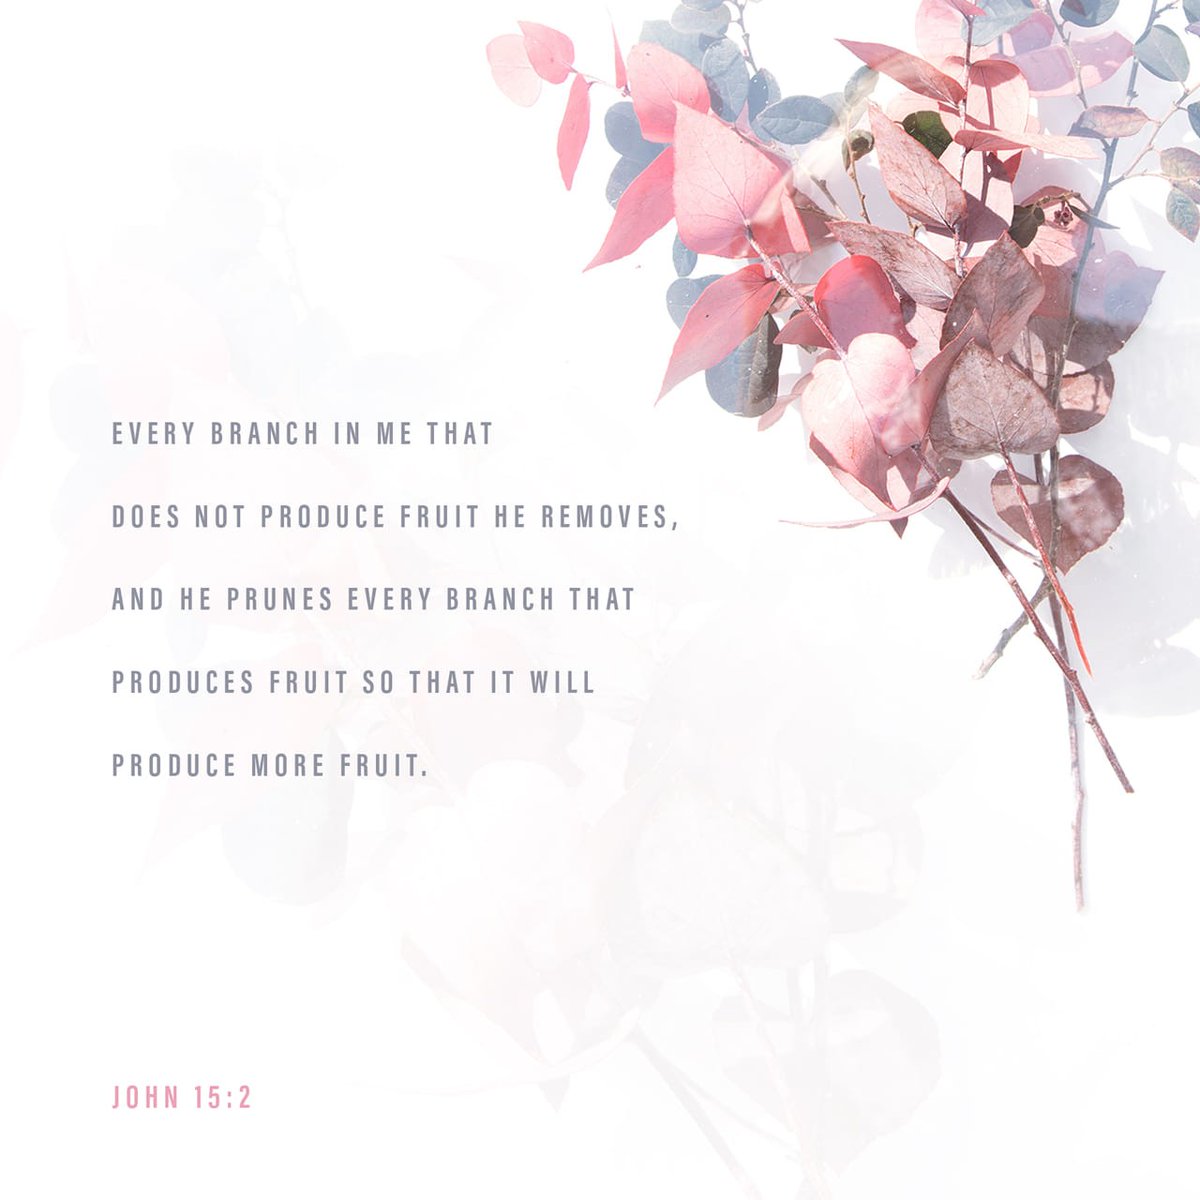 John 15:2 NASB Every branch in Me that does not bear fruit, He takes away; and every branch that bears fruit, He prunes it so that it may bear more fruit. #dailybread #dailyverse #scripture #bibleverse #bible #jesus #vine #gardener #prune #gardening